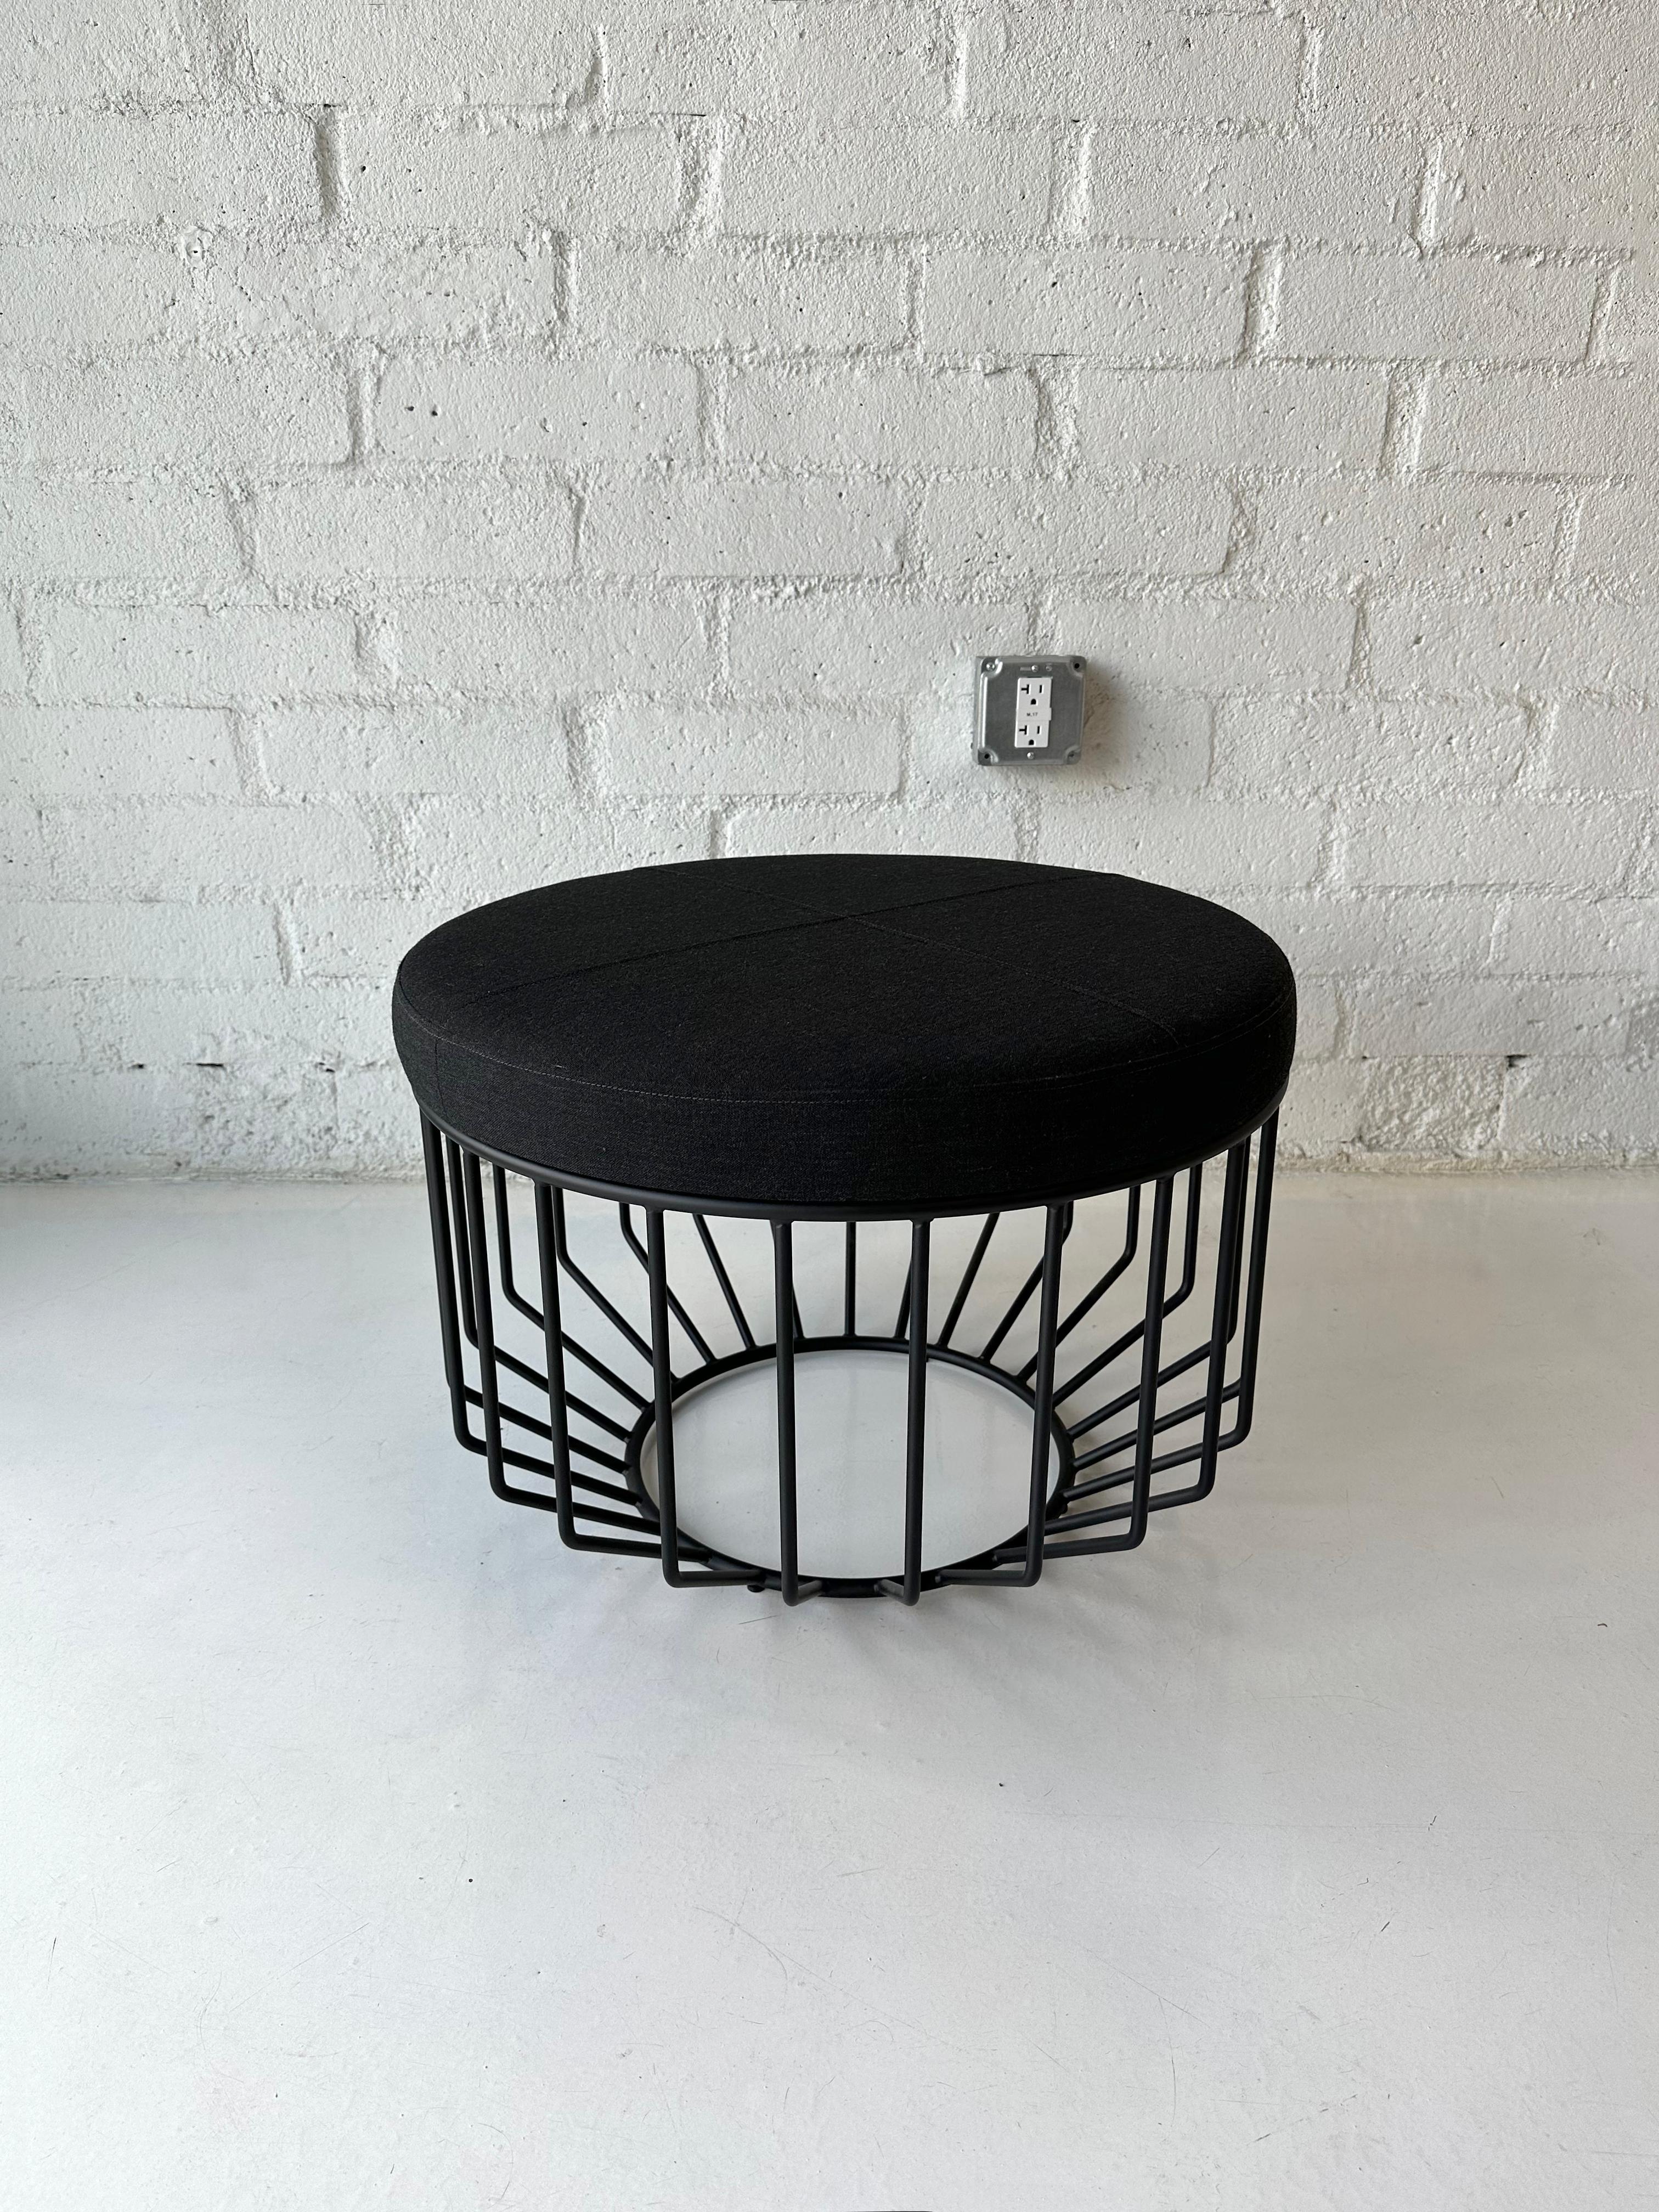 Wired Ottomans designed by Reza Feiz, for Phase Design
- Flat Black & Remix by Kvadrat fabric
- MSRP= $ 1,975.00 Each 
- Brand New condition, unused. 
- Made in Los Angeles
- (4) available- can be bought individually or as a set. All (4) pieces